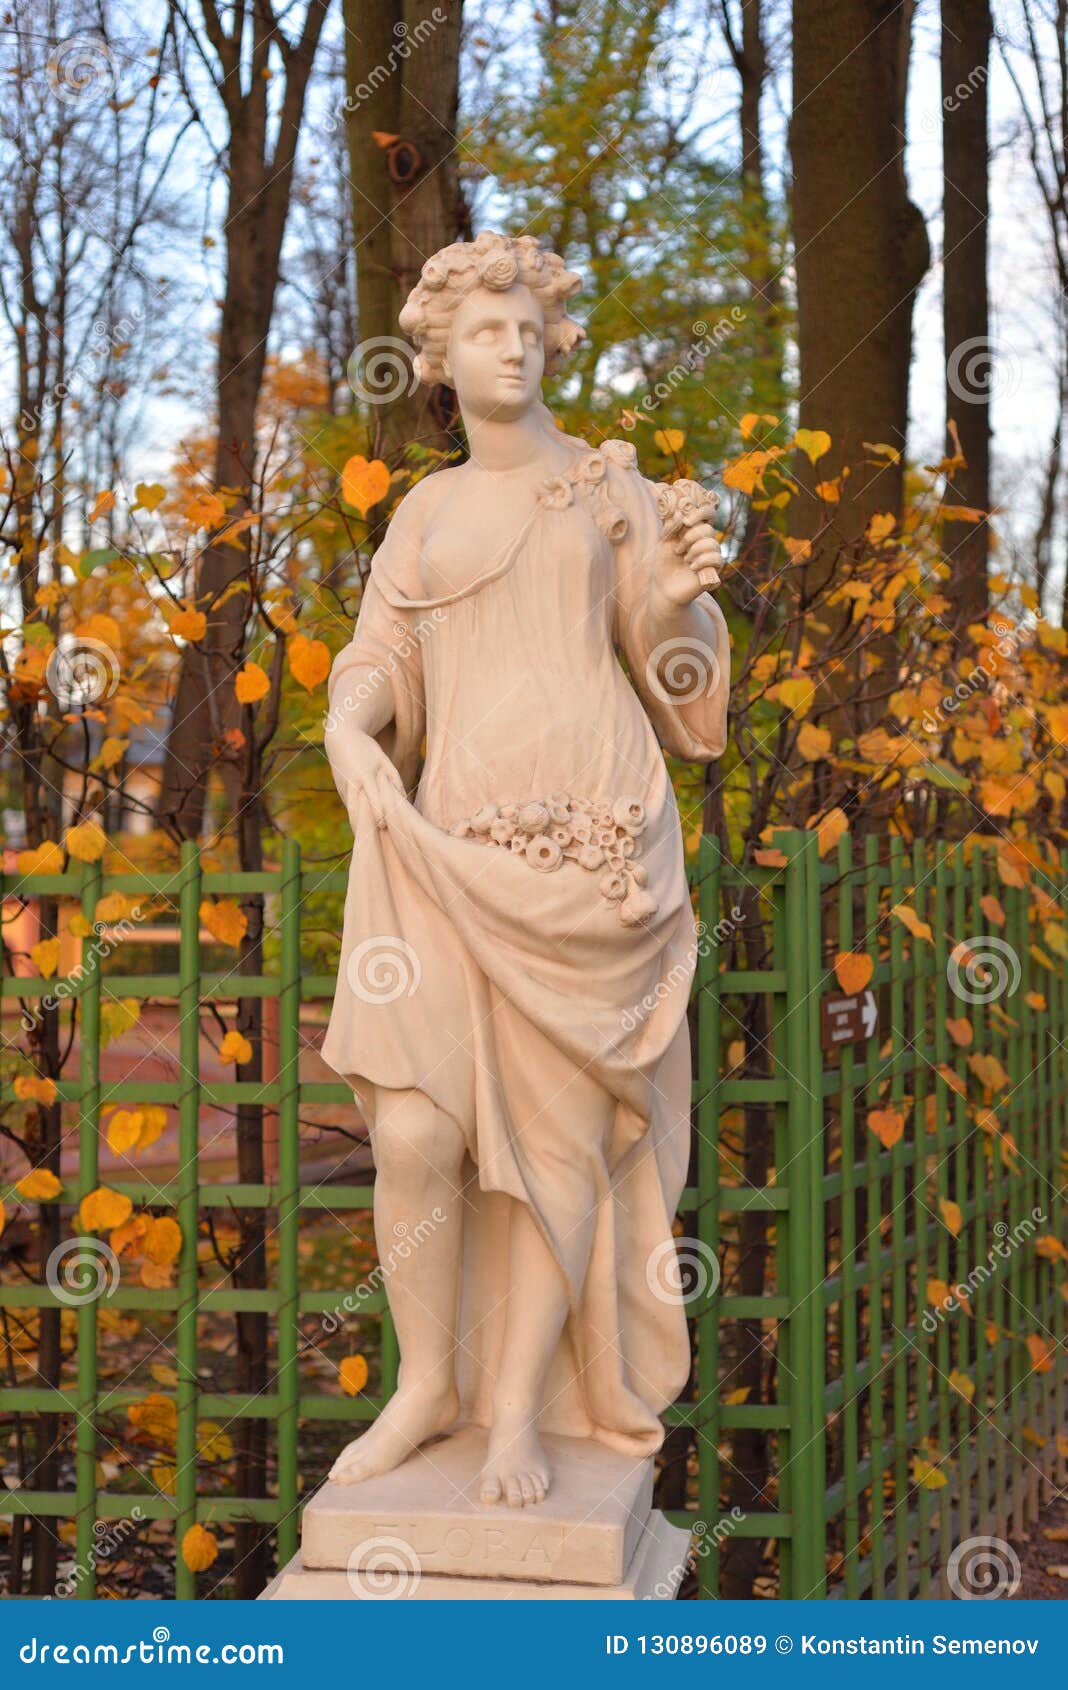 624 Goddess Flora Photos Free Royalty Free Stock Photos From Dreamstime